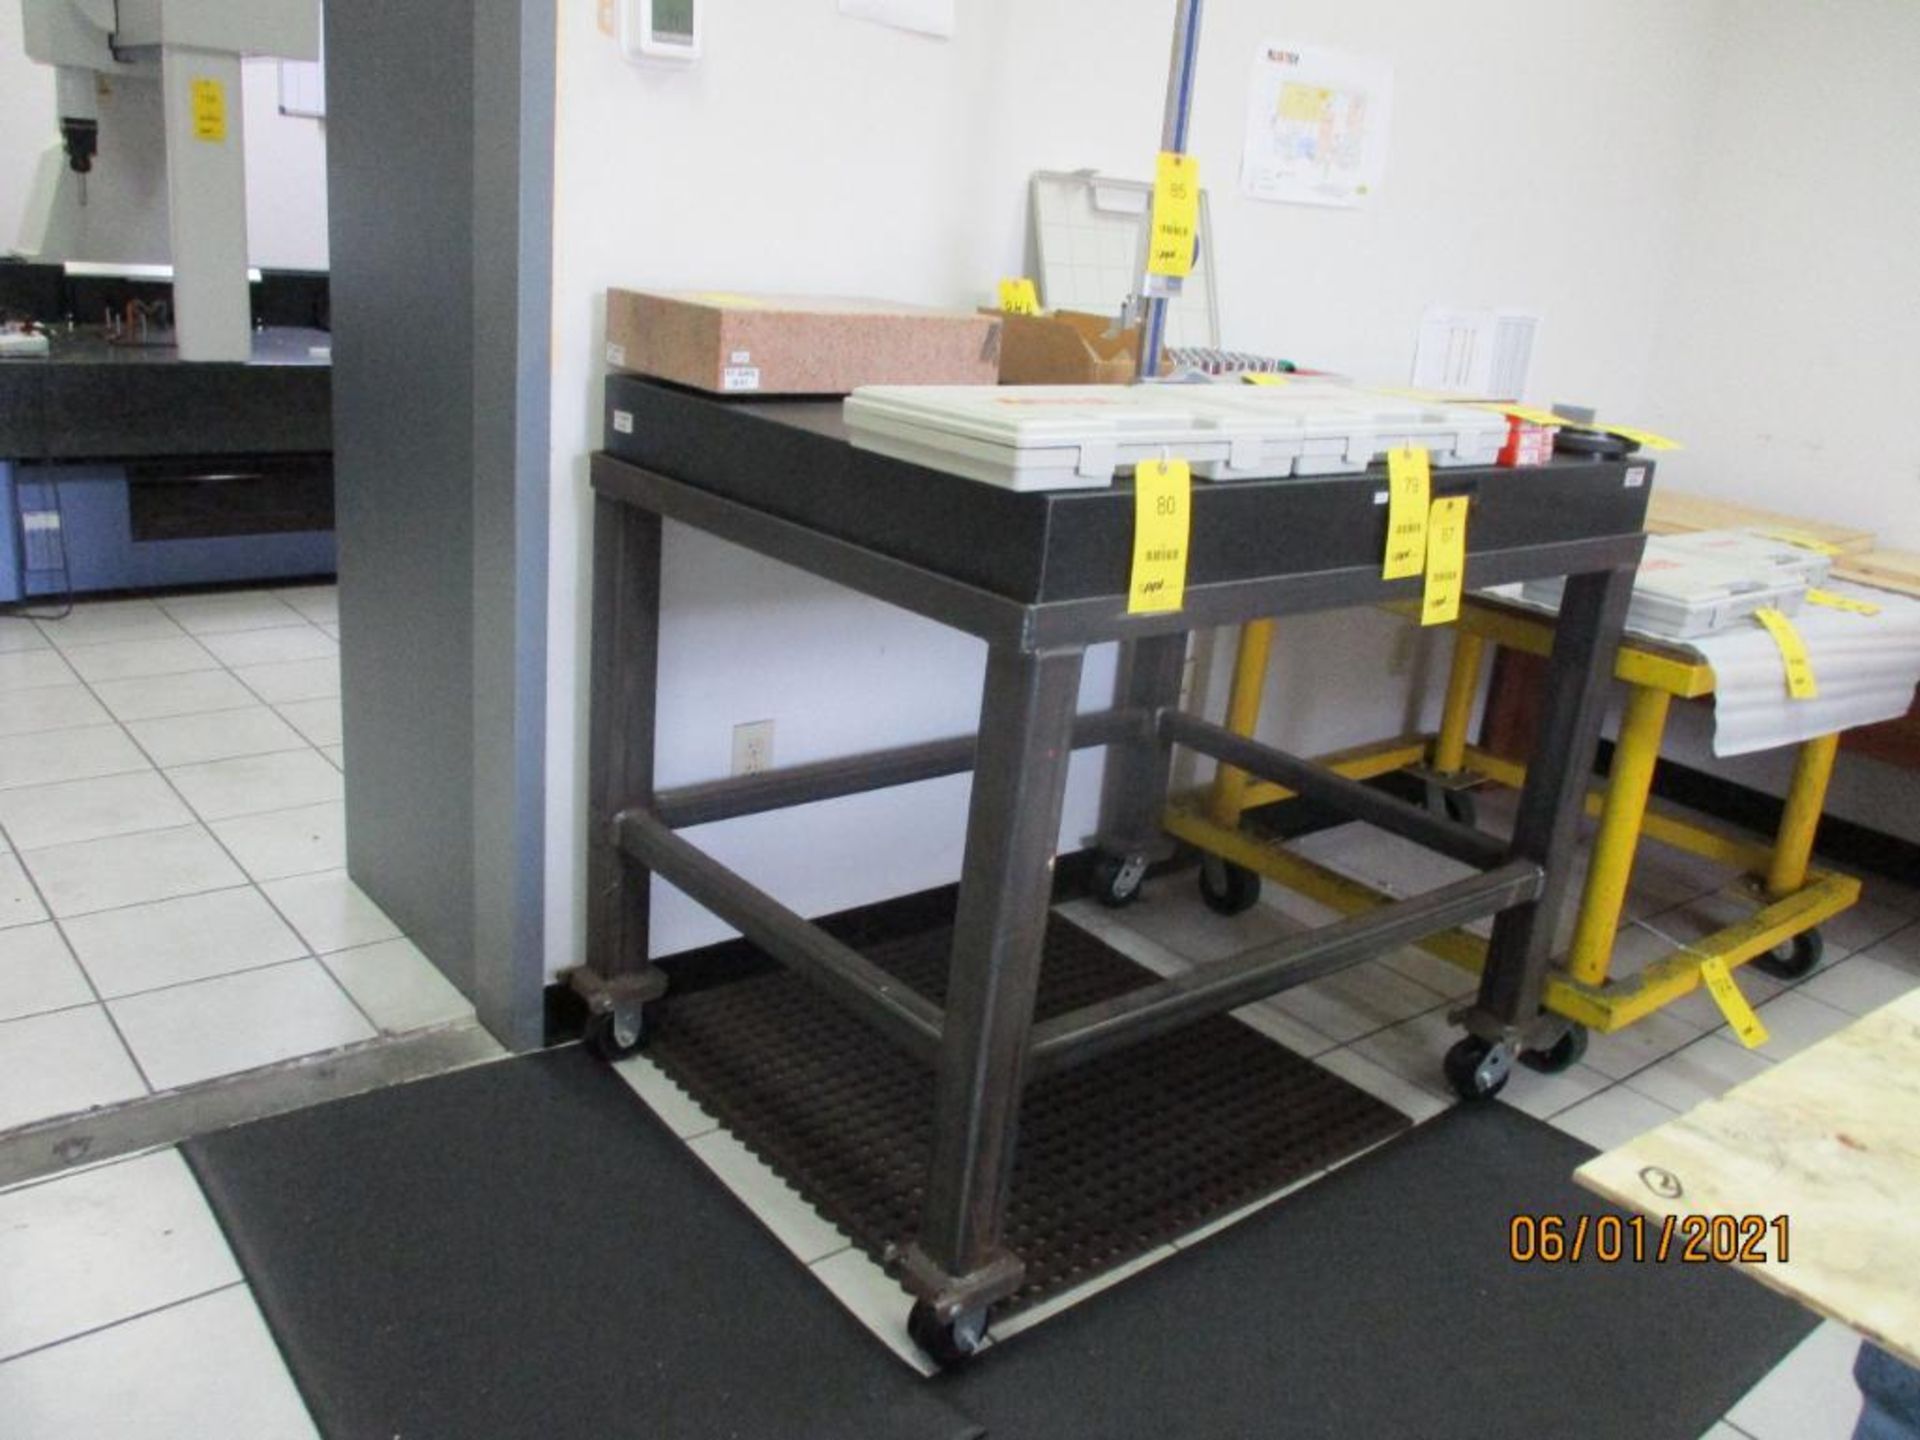 Surface Granite Plate Mounted on Steel Rolling Cart, 36 in. x 48 in. x 6 in. thick, Last Certified - Image 2 of 3